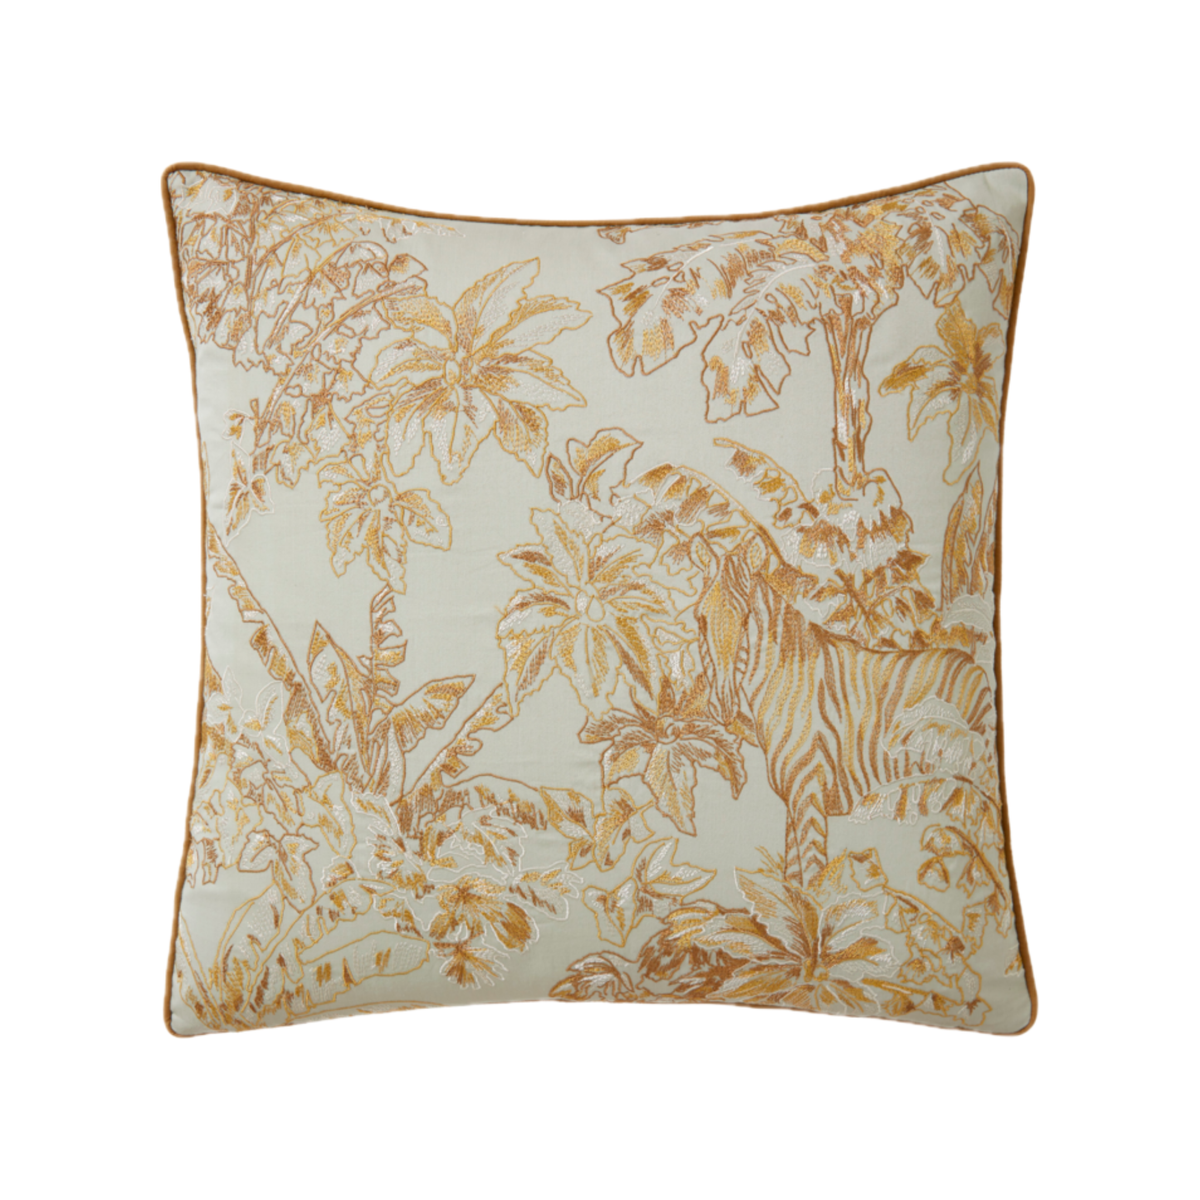 Decorative Pillow of Yves Delorme Faune Bedding